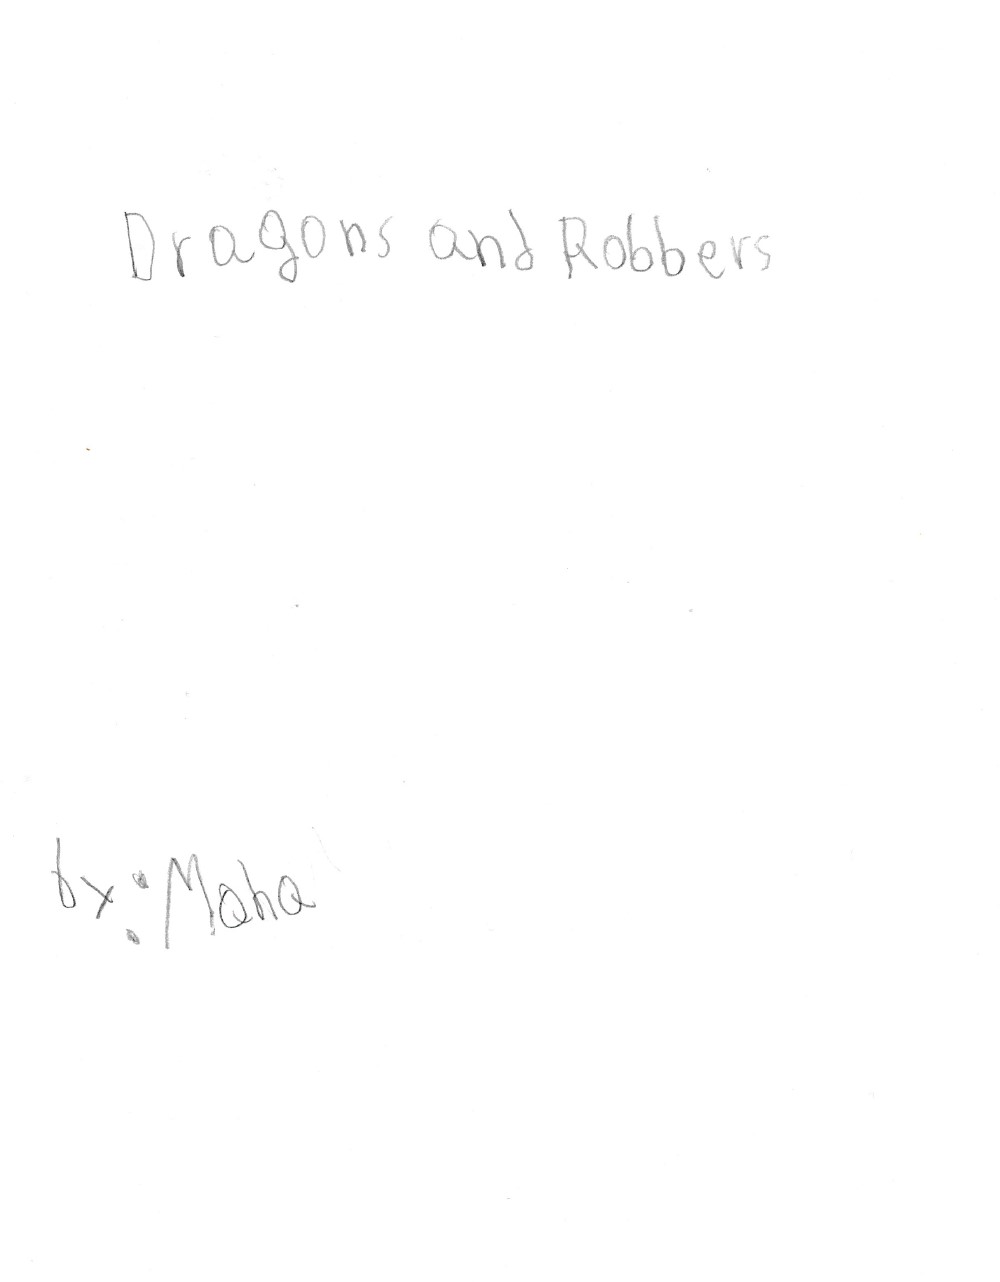 Dragons and Robbers by Maha G.